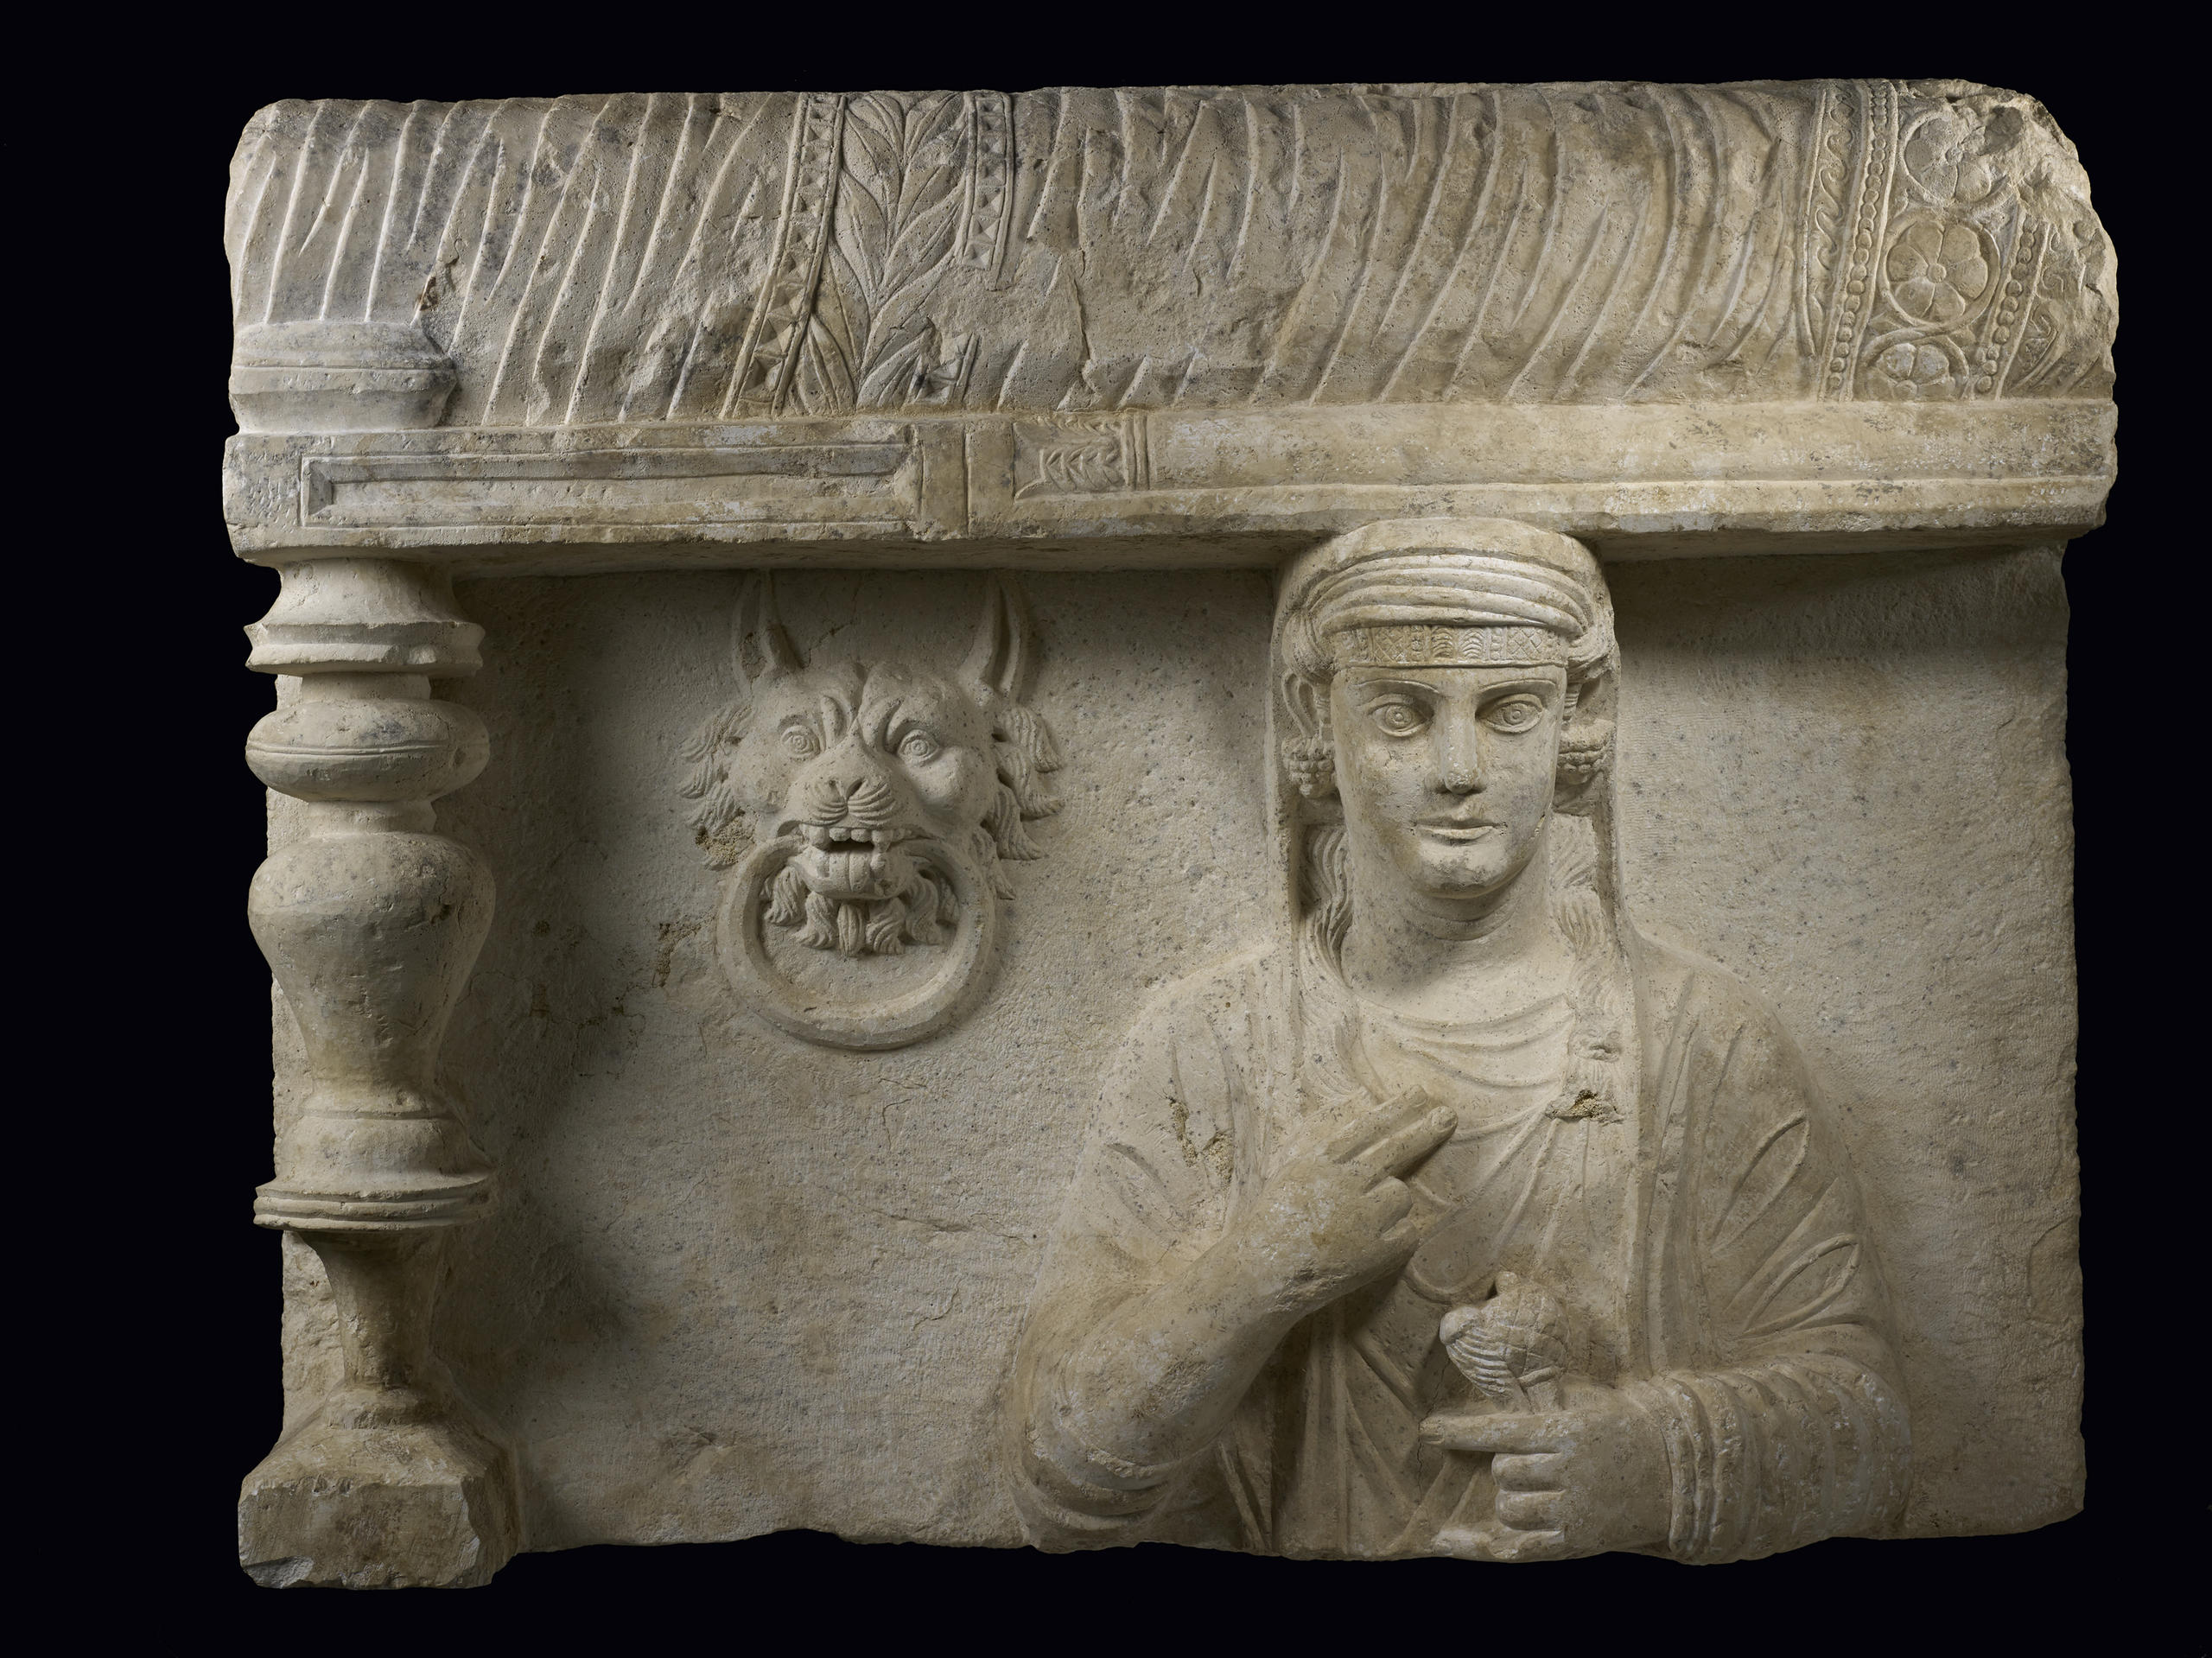 A funereal bas-relief with a female portrait from Syria, 2nd century BC.